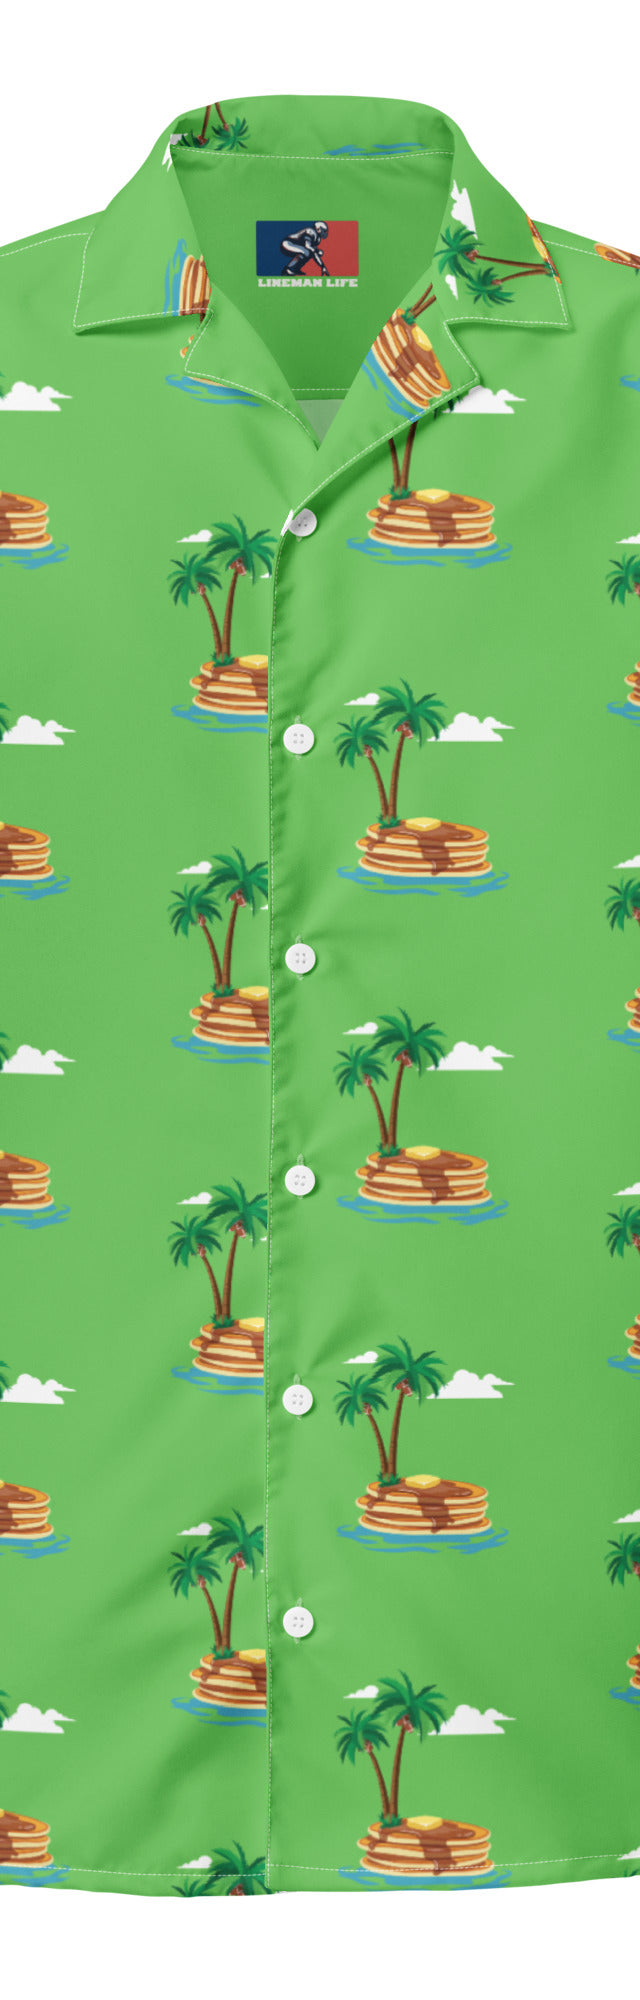 Pancakes and Palm Trees - Green